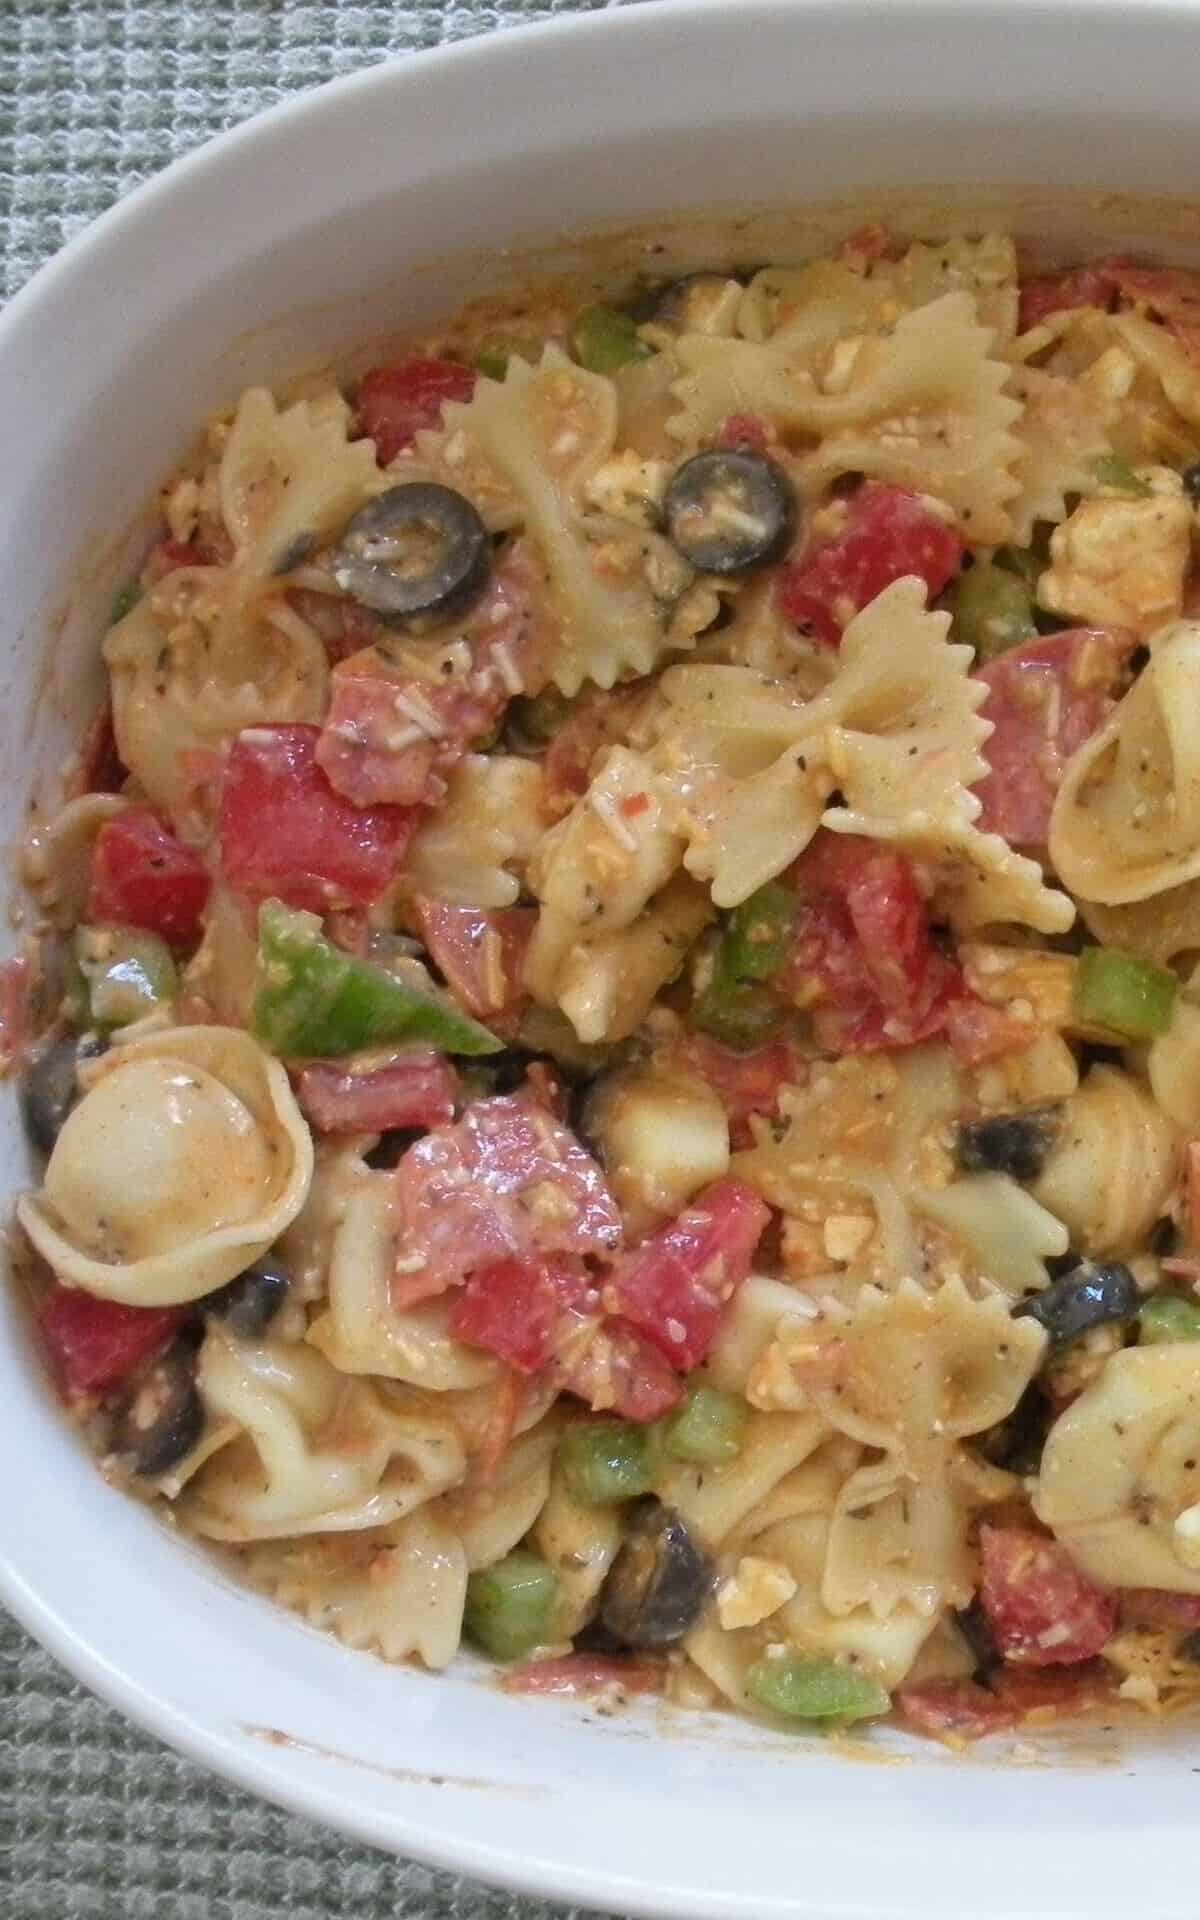  A colorful bowl of pasta salad, perfect for any summer occasion!